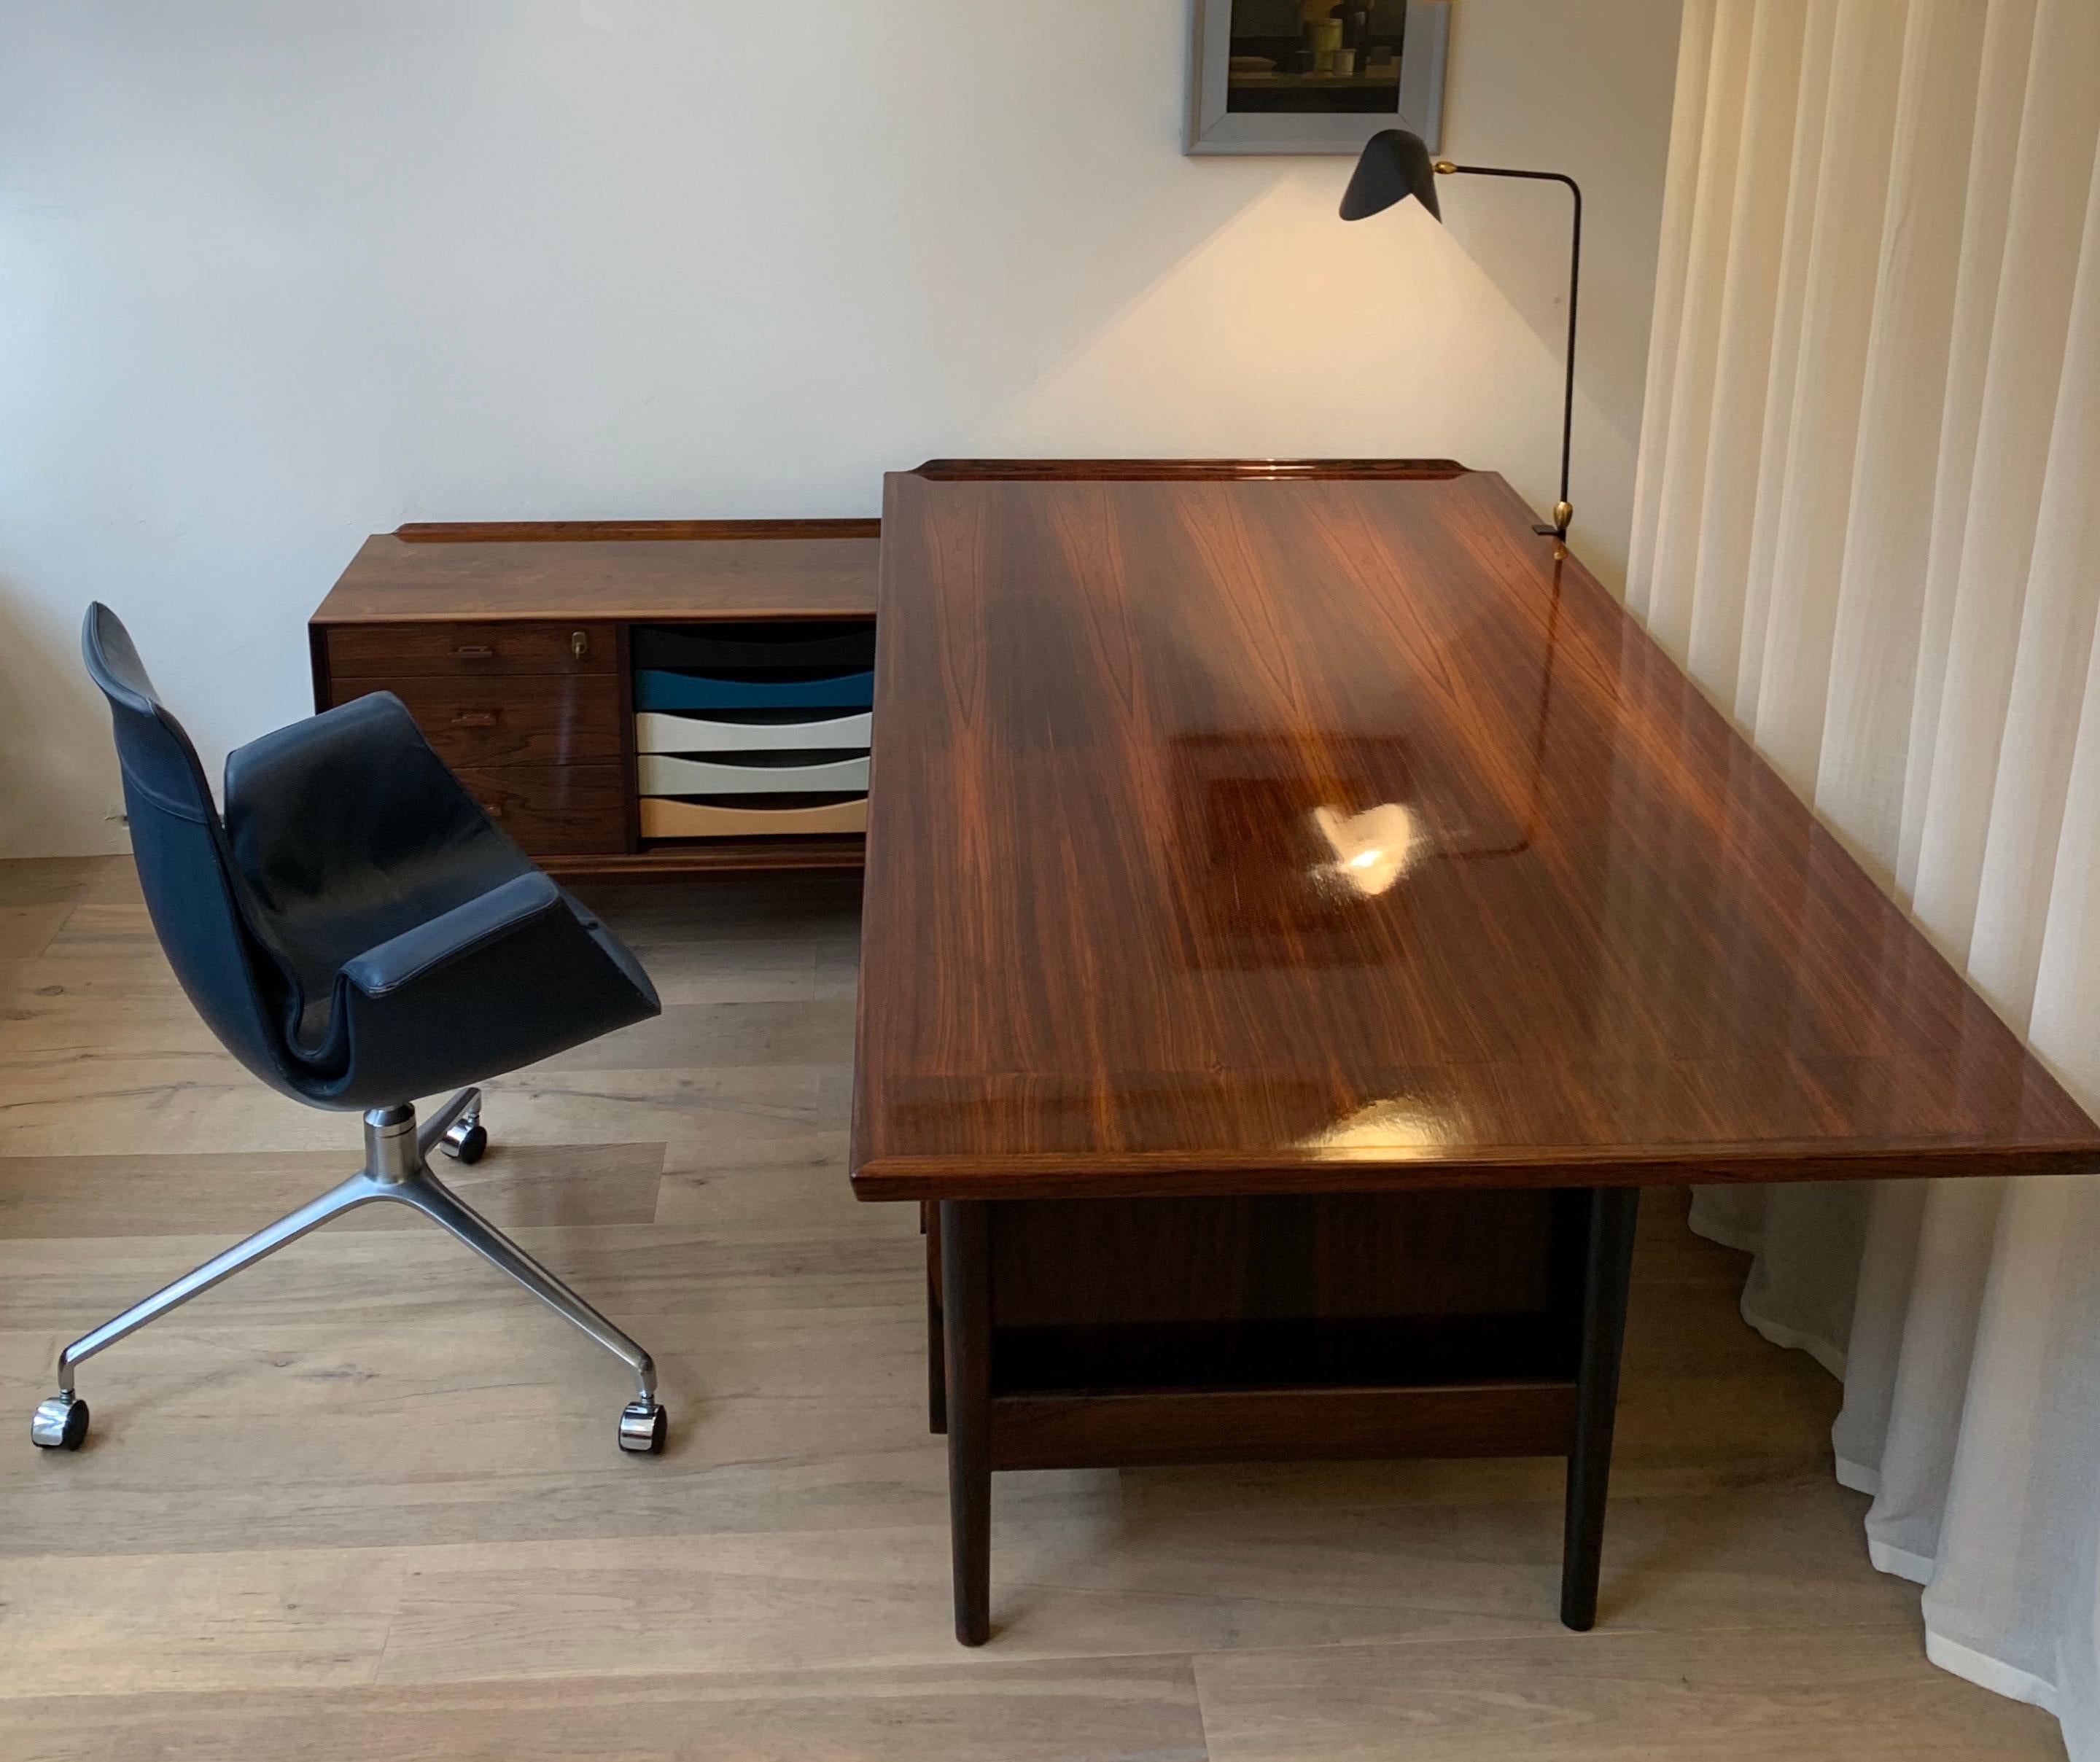 Impressive Rosewood freestanding desk & return /credenza model 209 by Arne Vodder, made by Helge Sibast Denmark circa 1958. 

The desk, with raised edge to the left, is executed with a three drawer compartment on the right side with a full working